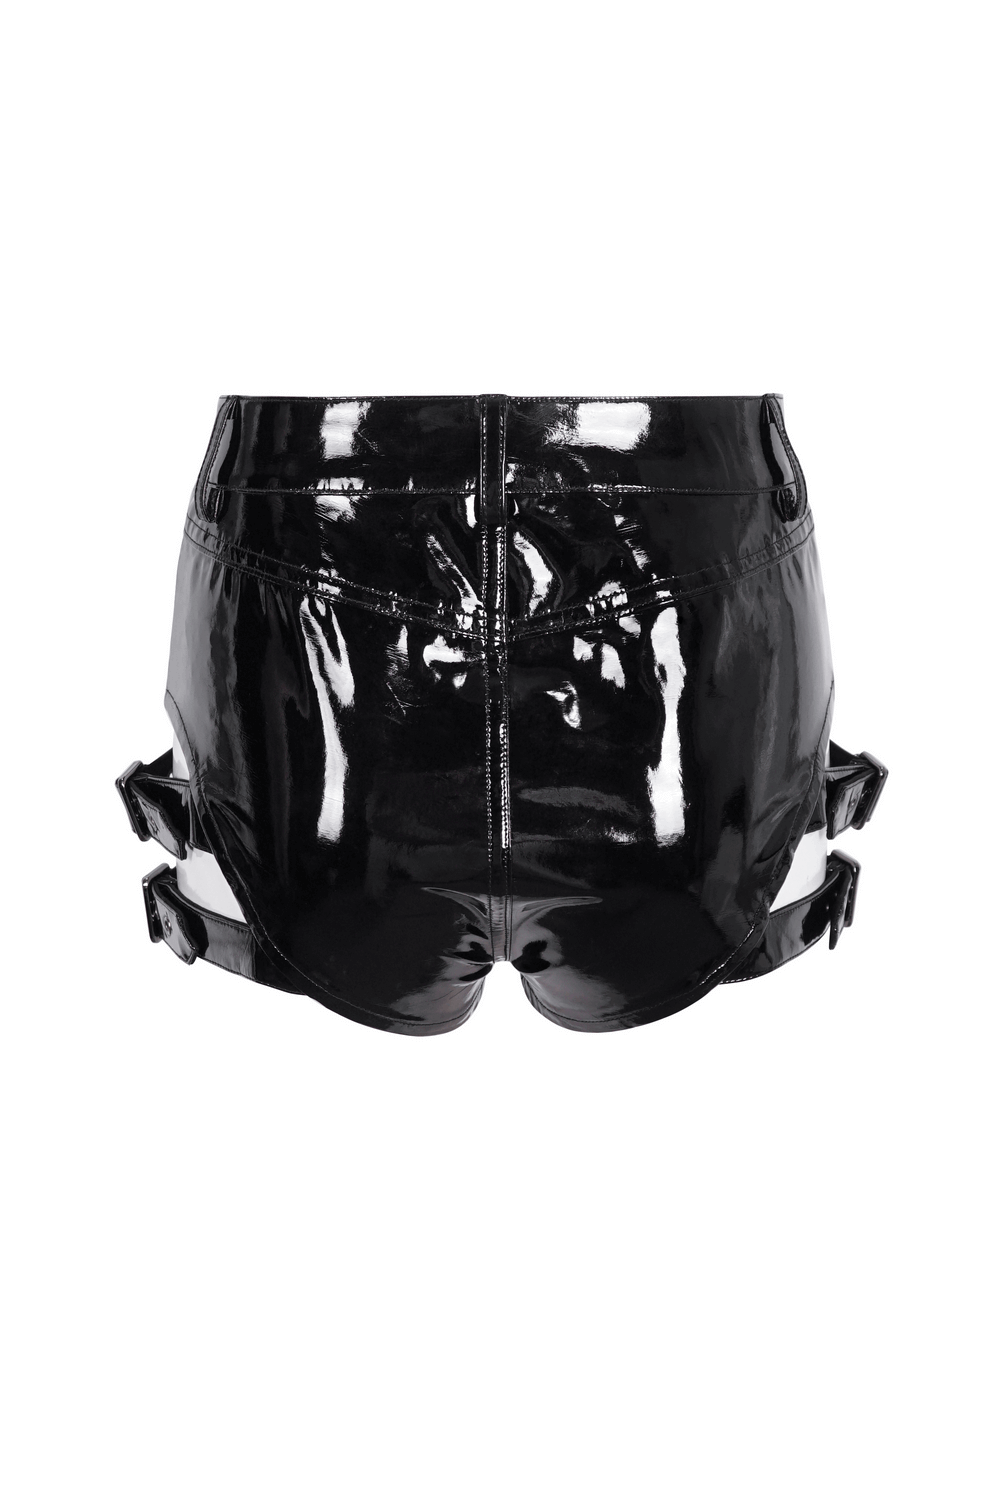 Women's High-Waisted Faux Leather Shorts with Buckles